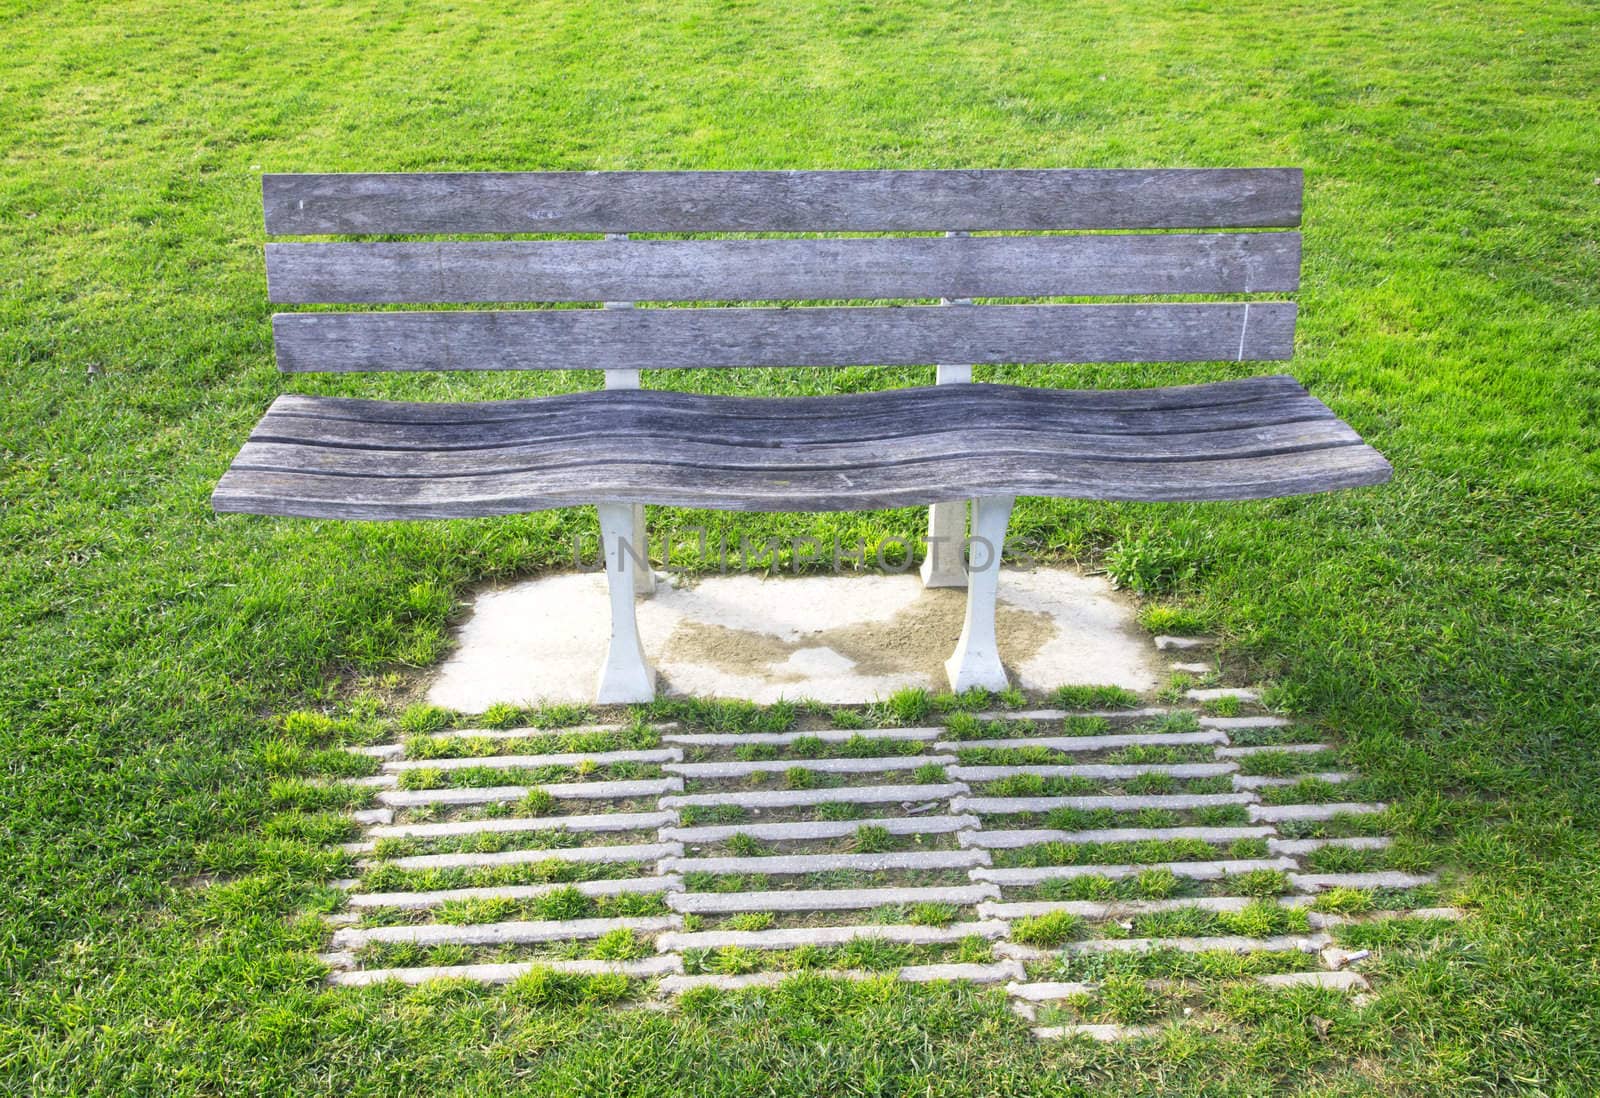 Portugal. Bench in a lawn   by oxanatravel